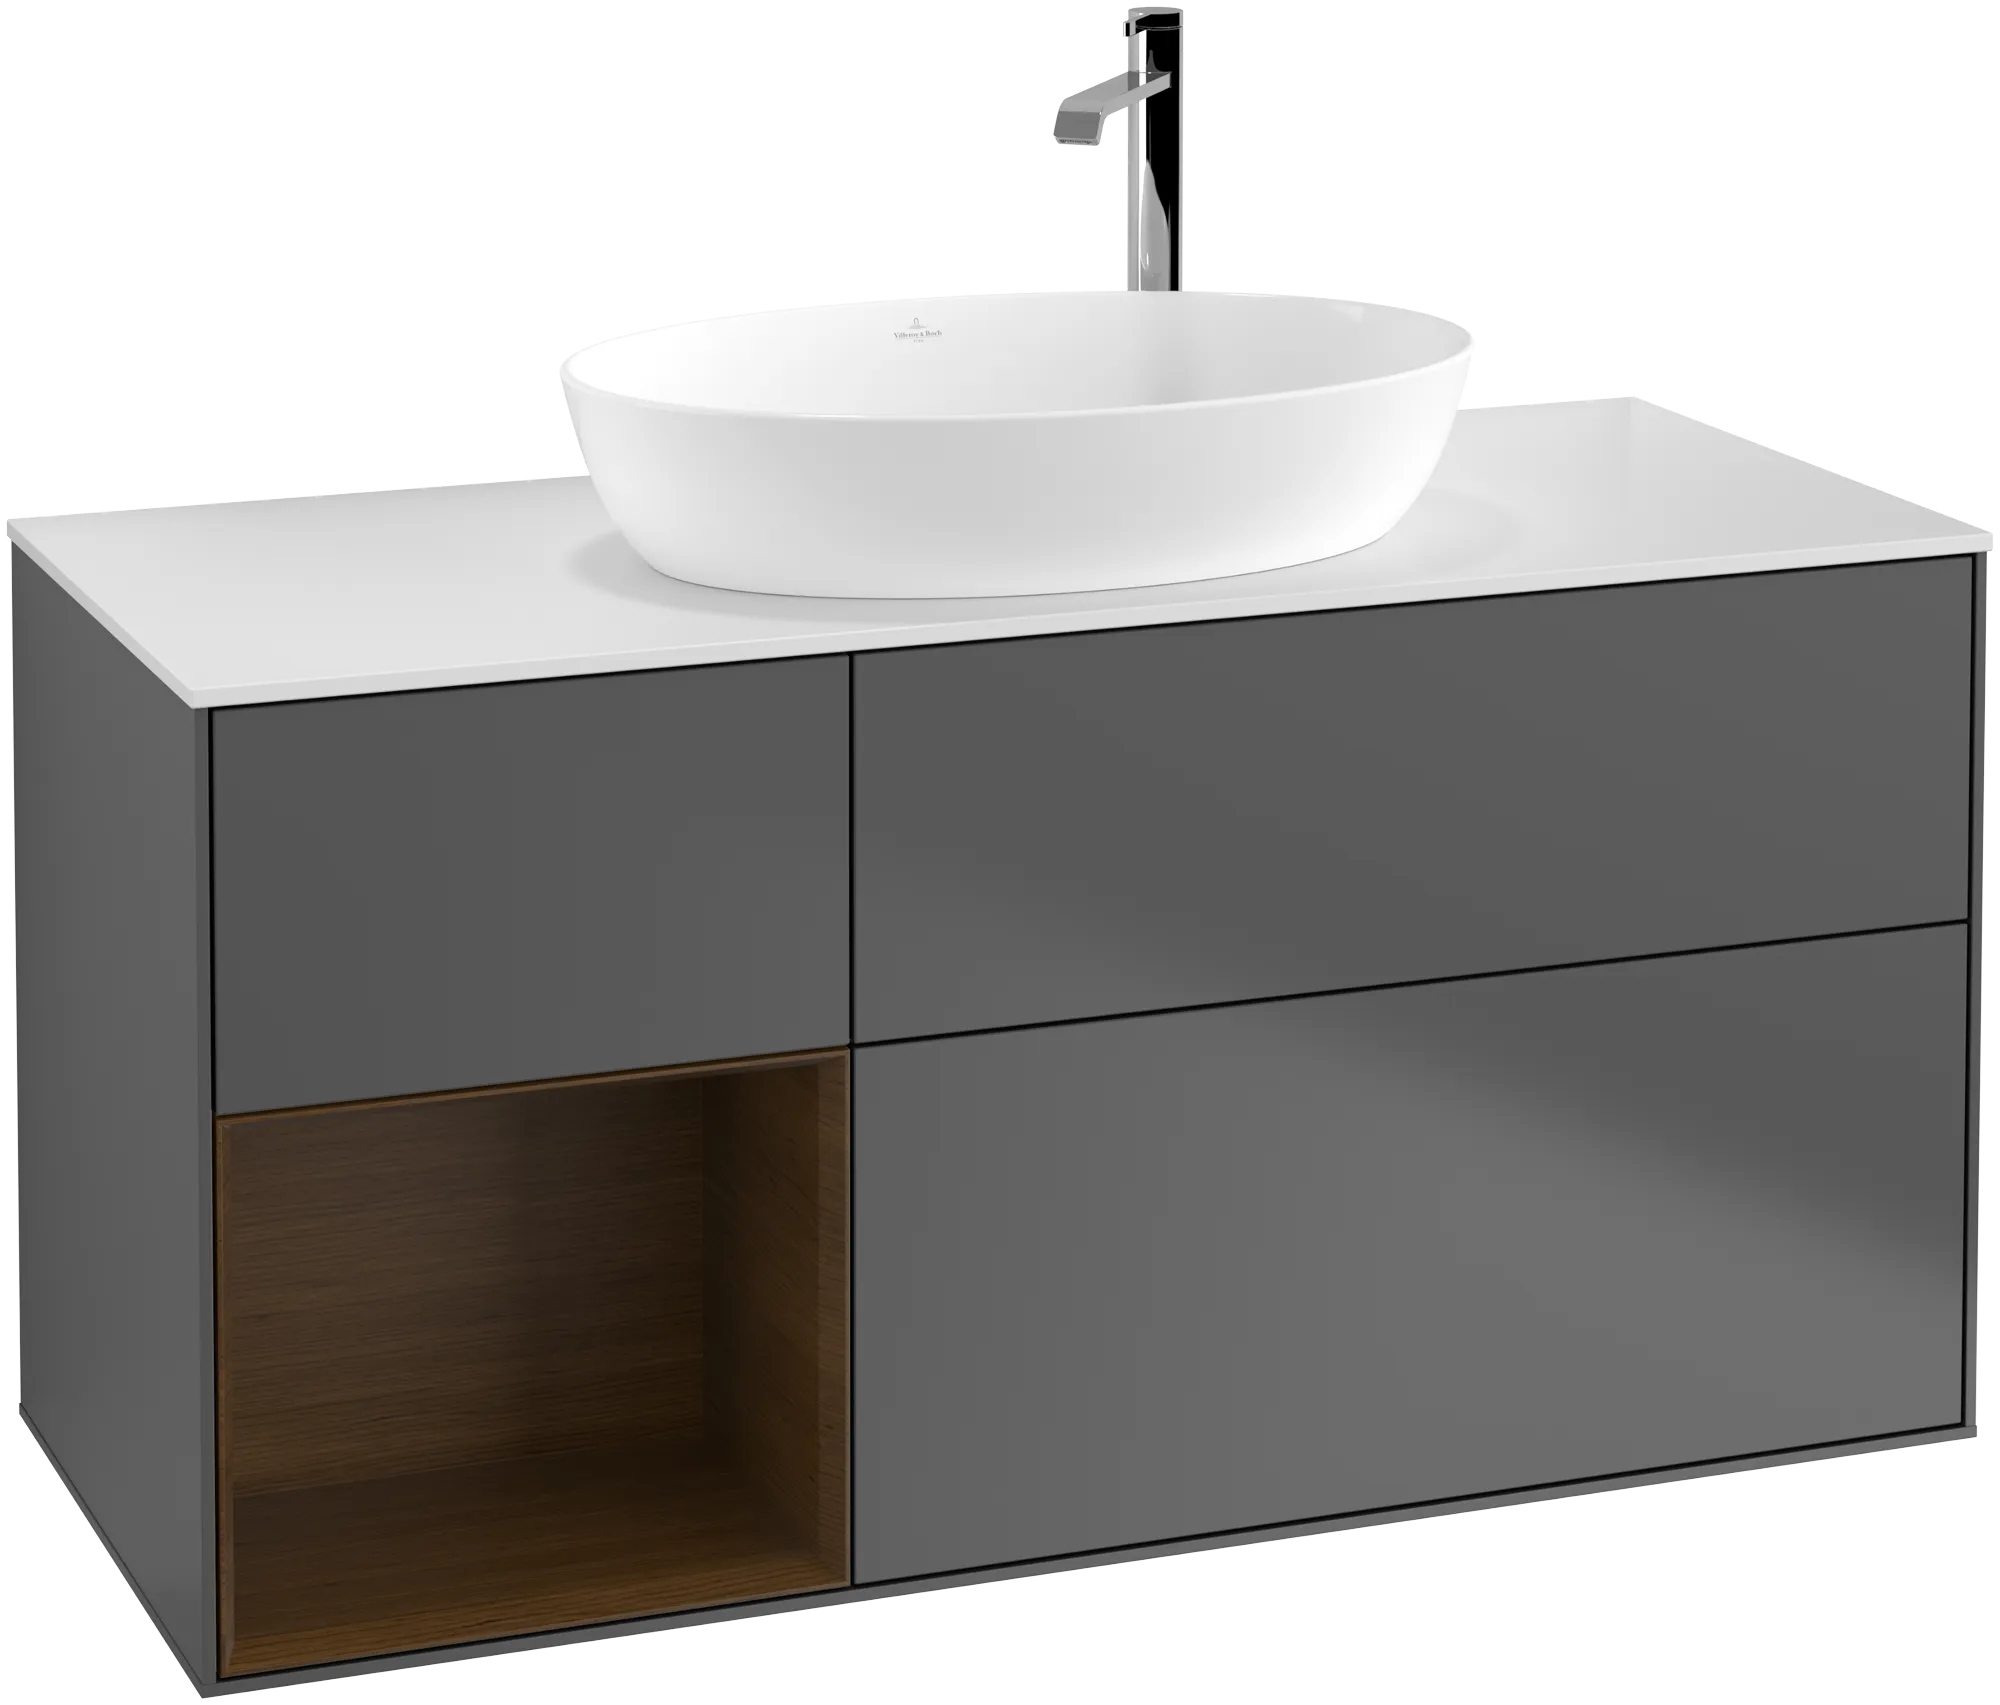 Picture of VILLEROY BOCH Finion Vanity unit, with lighting, 3 pull-out compartments, 1200 x 603 x 501 mm, Anthracite Matt Lacquer / Walnut Veneer / Glass White Matt #G941GNGK